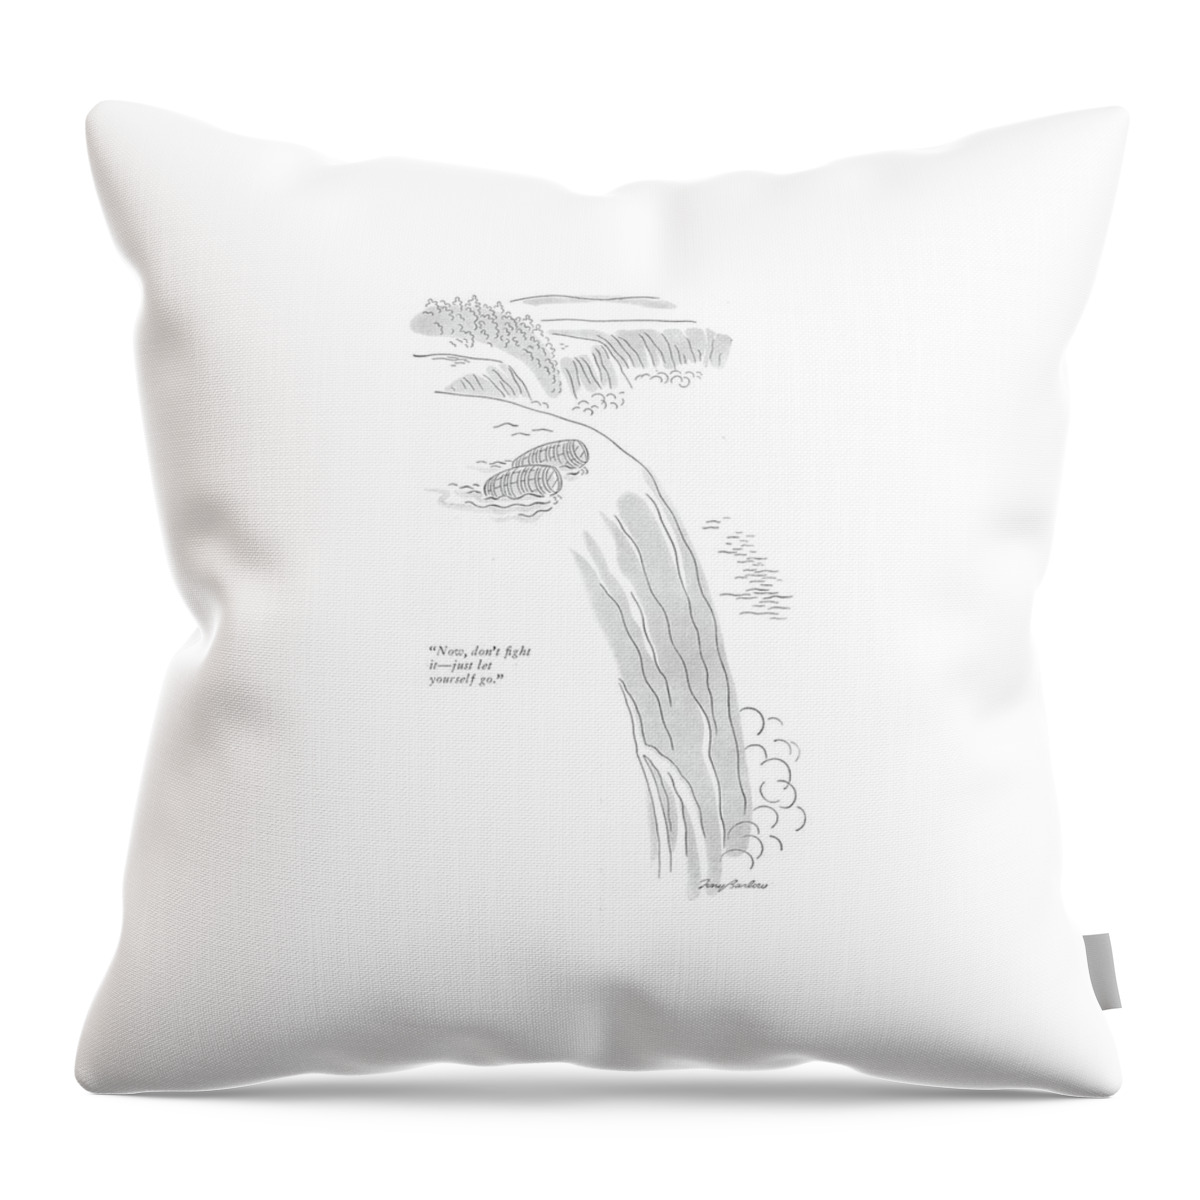 Now, Don't ?ght It - Just Let Yourself Go Throw Pillow